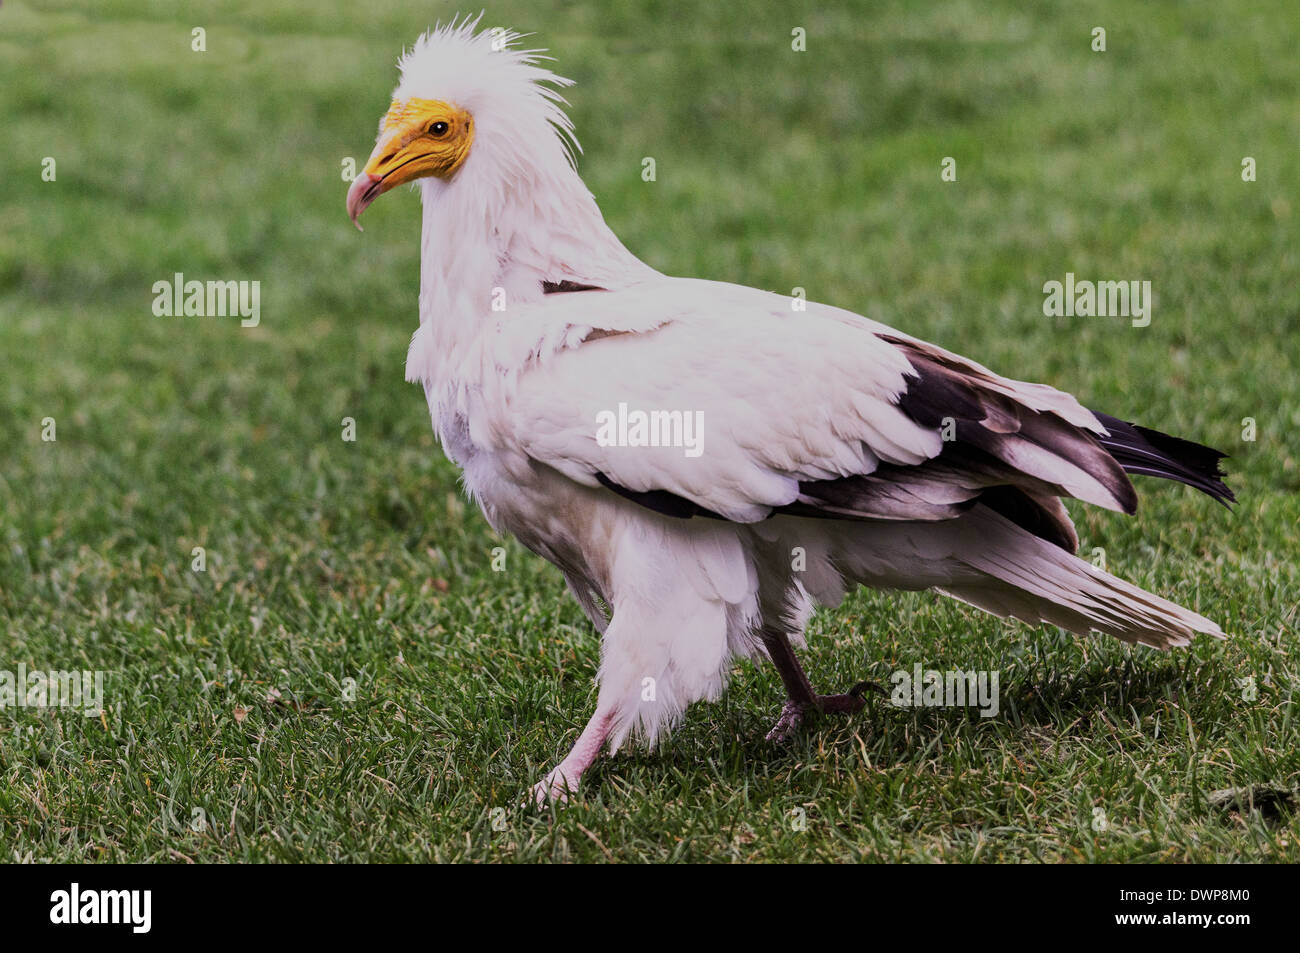 Adult Egyptian Vulture ( Neophron percnopterus ) on the ground. Stock Photo